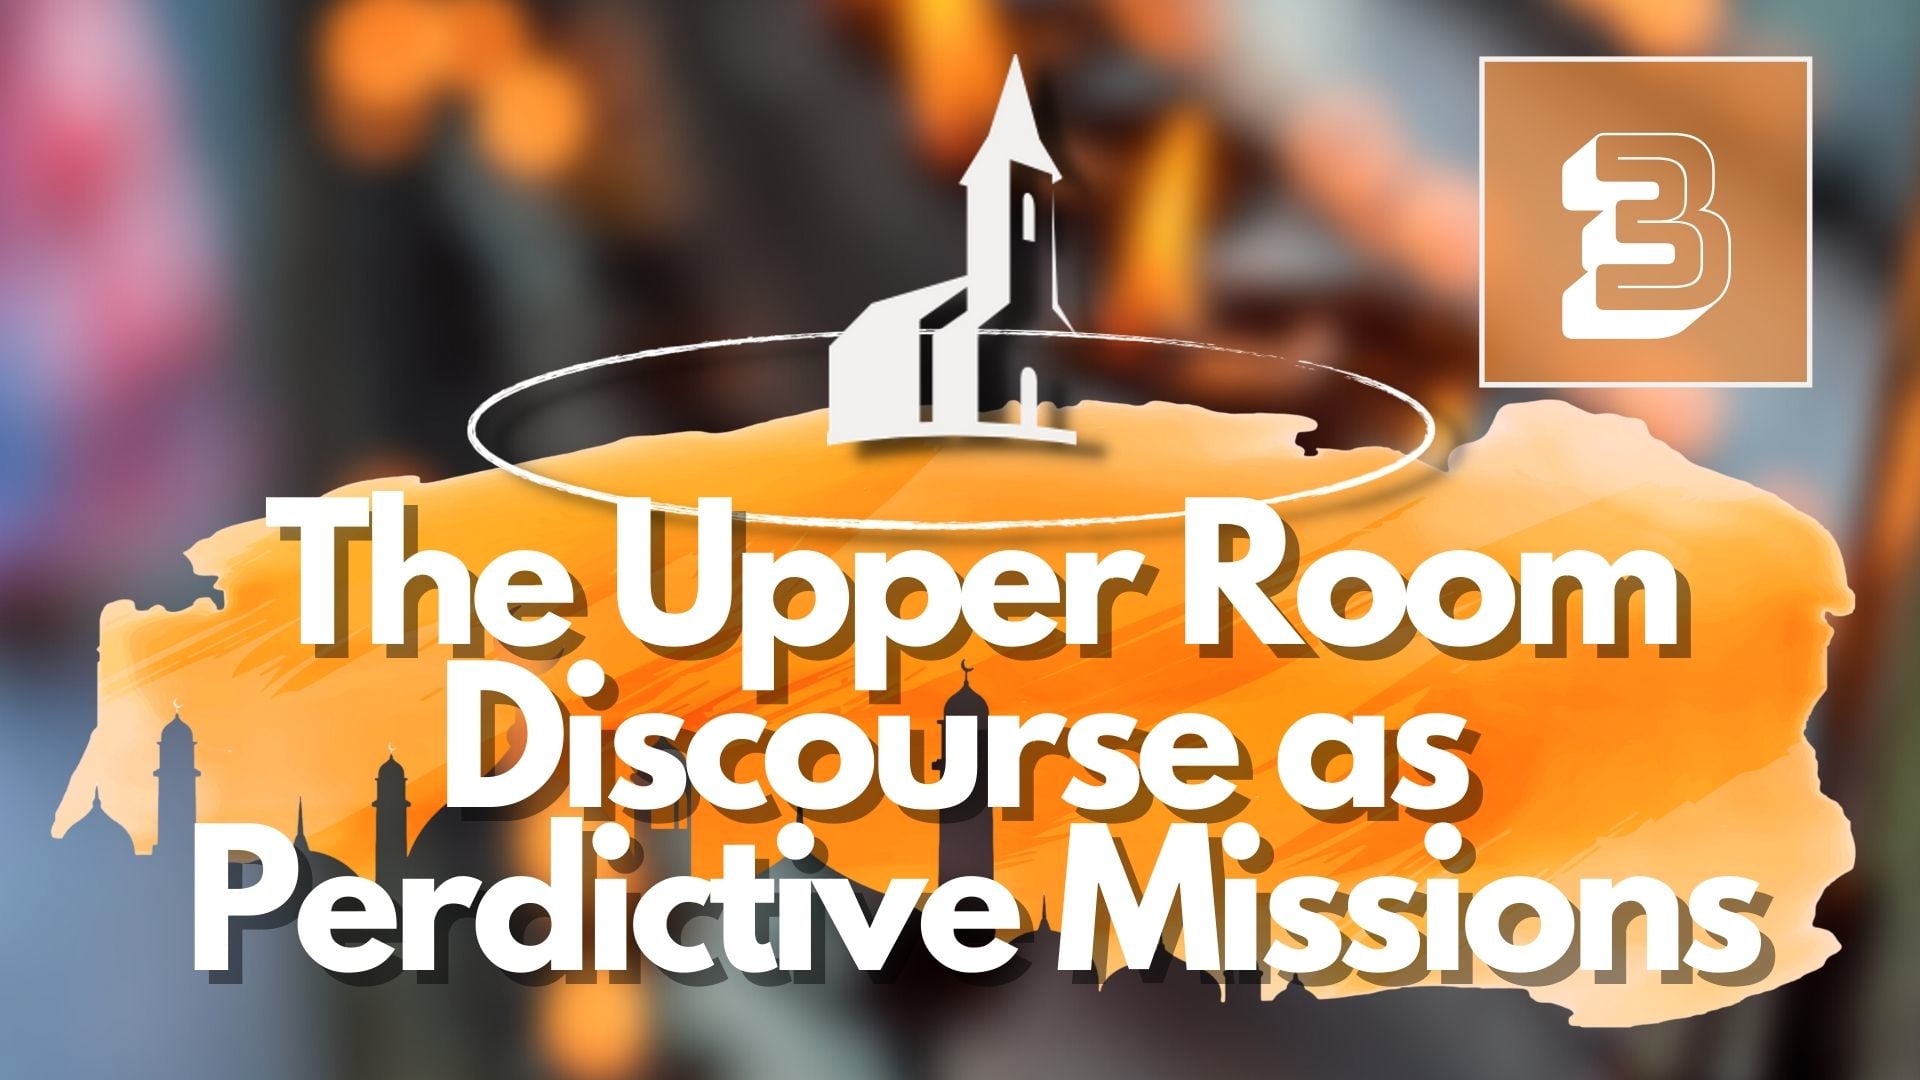 3. The Upper Room Discourse as Perdictive Missions – Mike Shipman